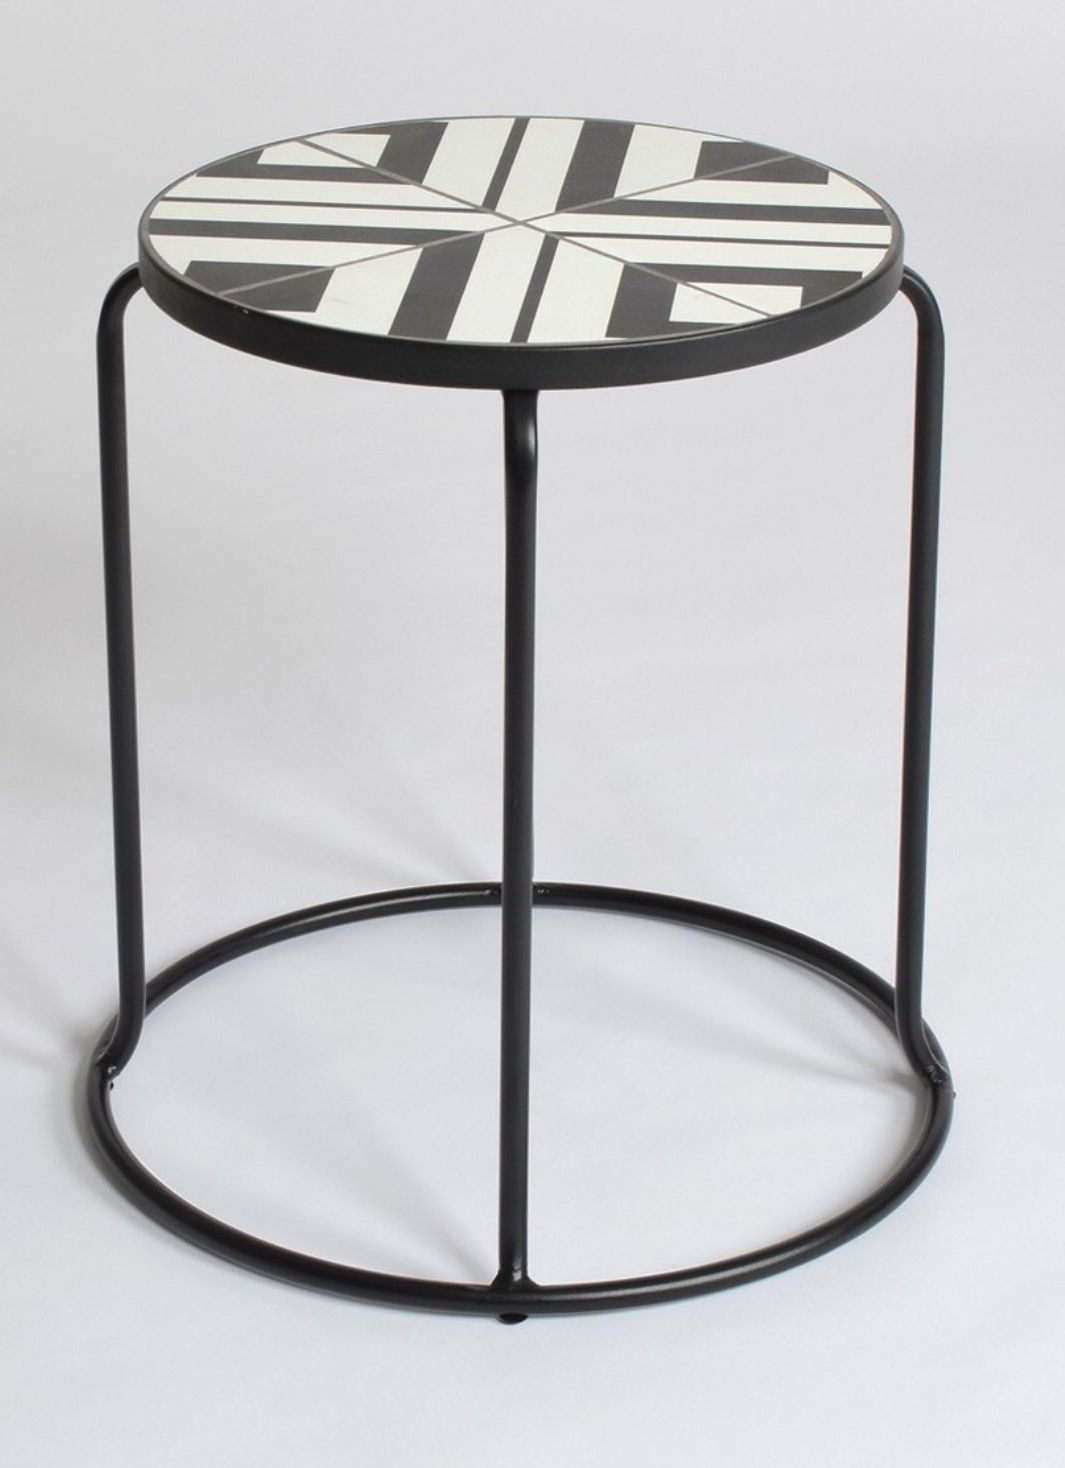 Geo Mosaic Indoor/outdoor Stack Accent Table Black/off White – Project With Regard To Newest Mosaic Black Outdoor Accent Tables (View 10 of 15)